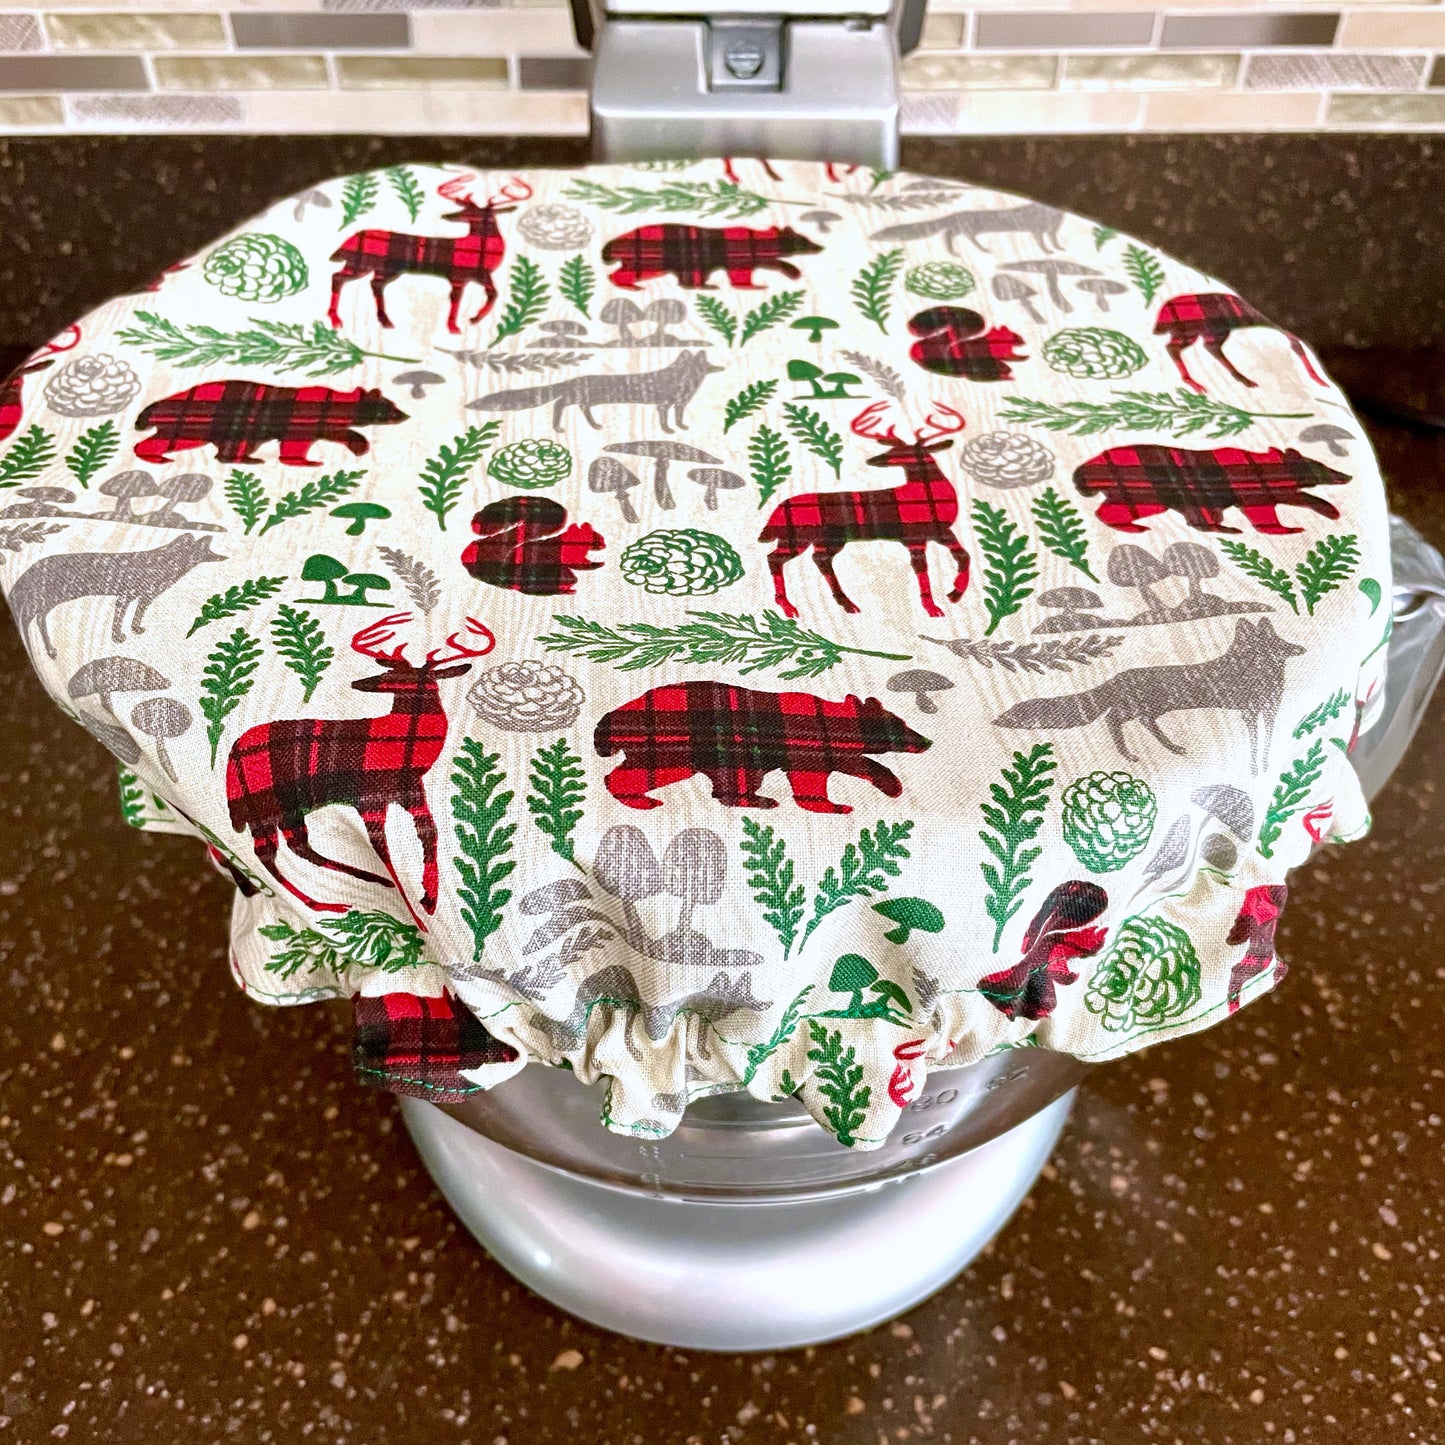 Stand Mixer Bowl Covers - Christmas Forest Animals